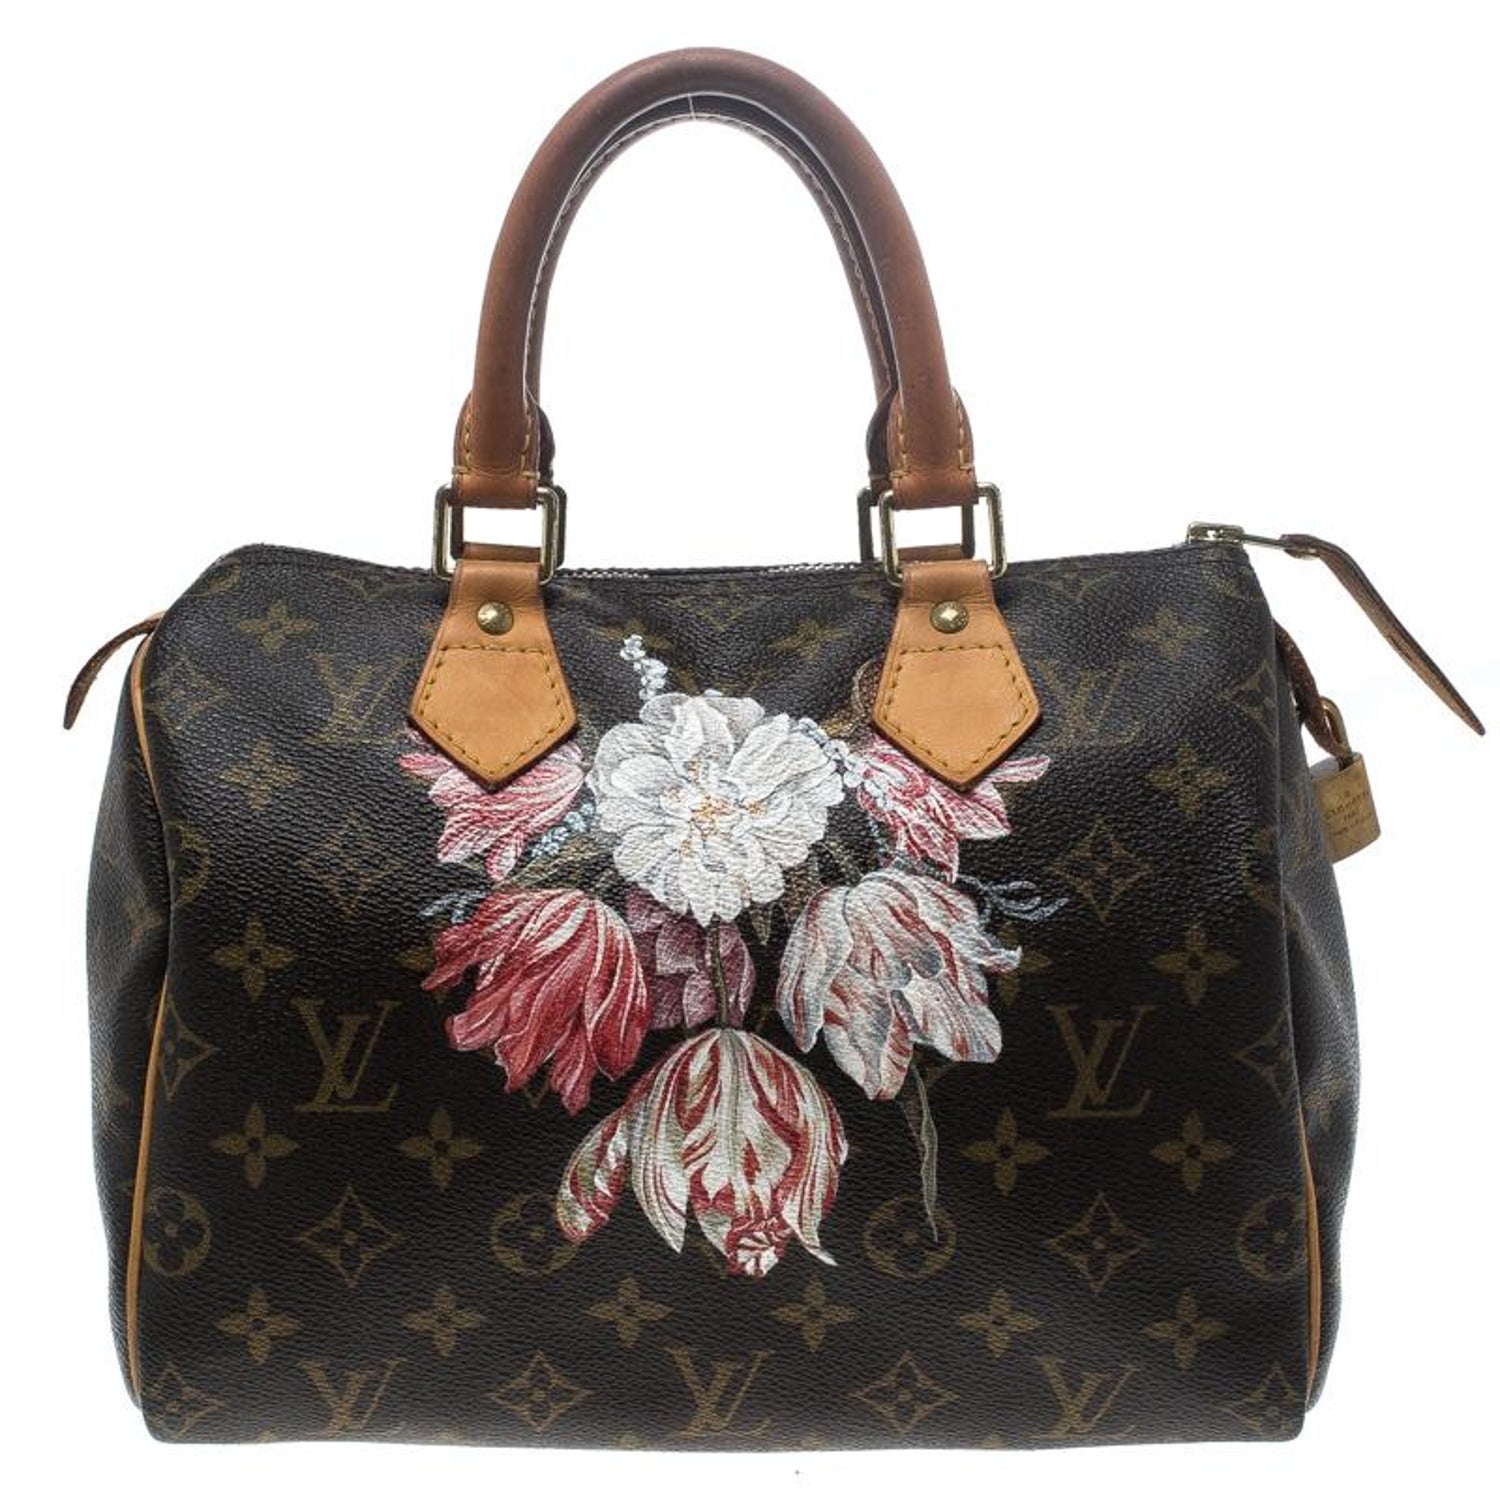 LV customized with hand painted art & add-ons